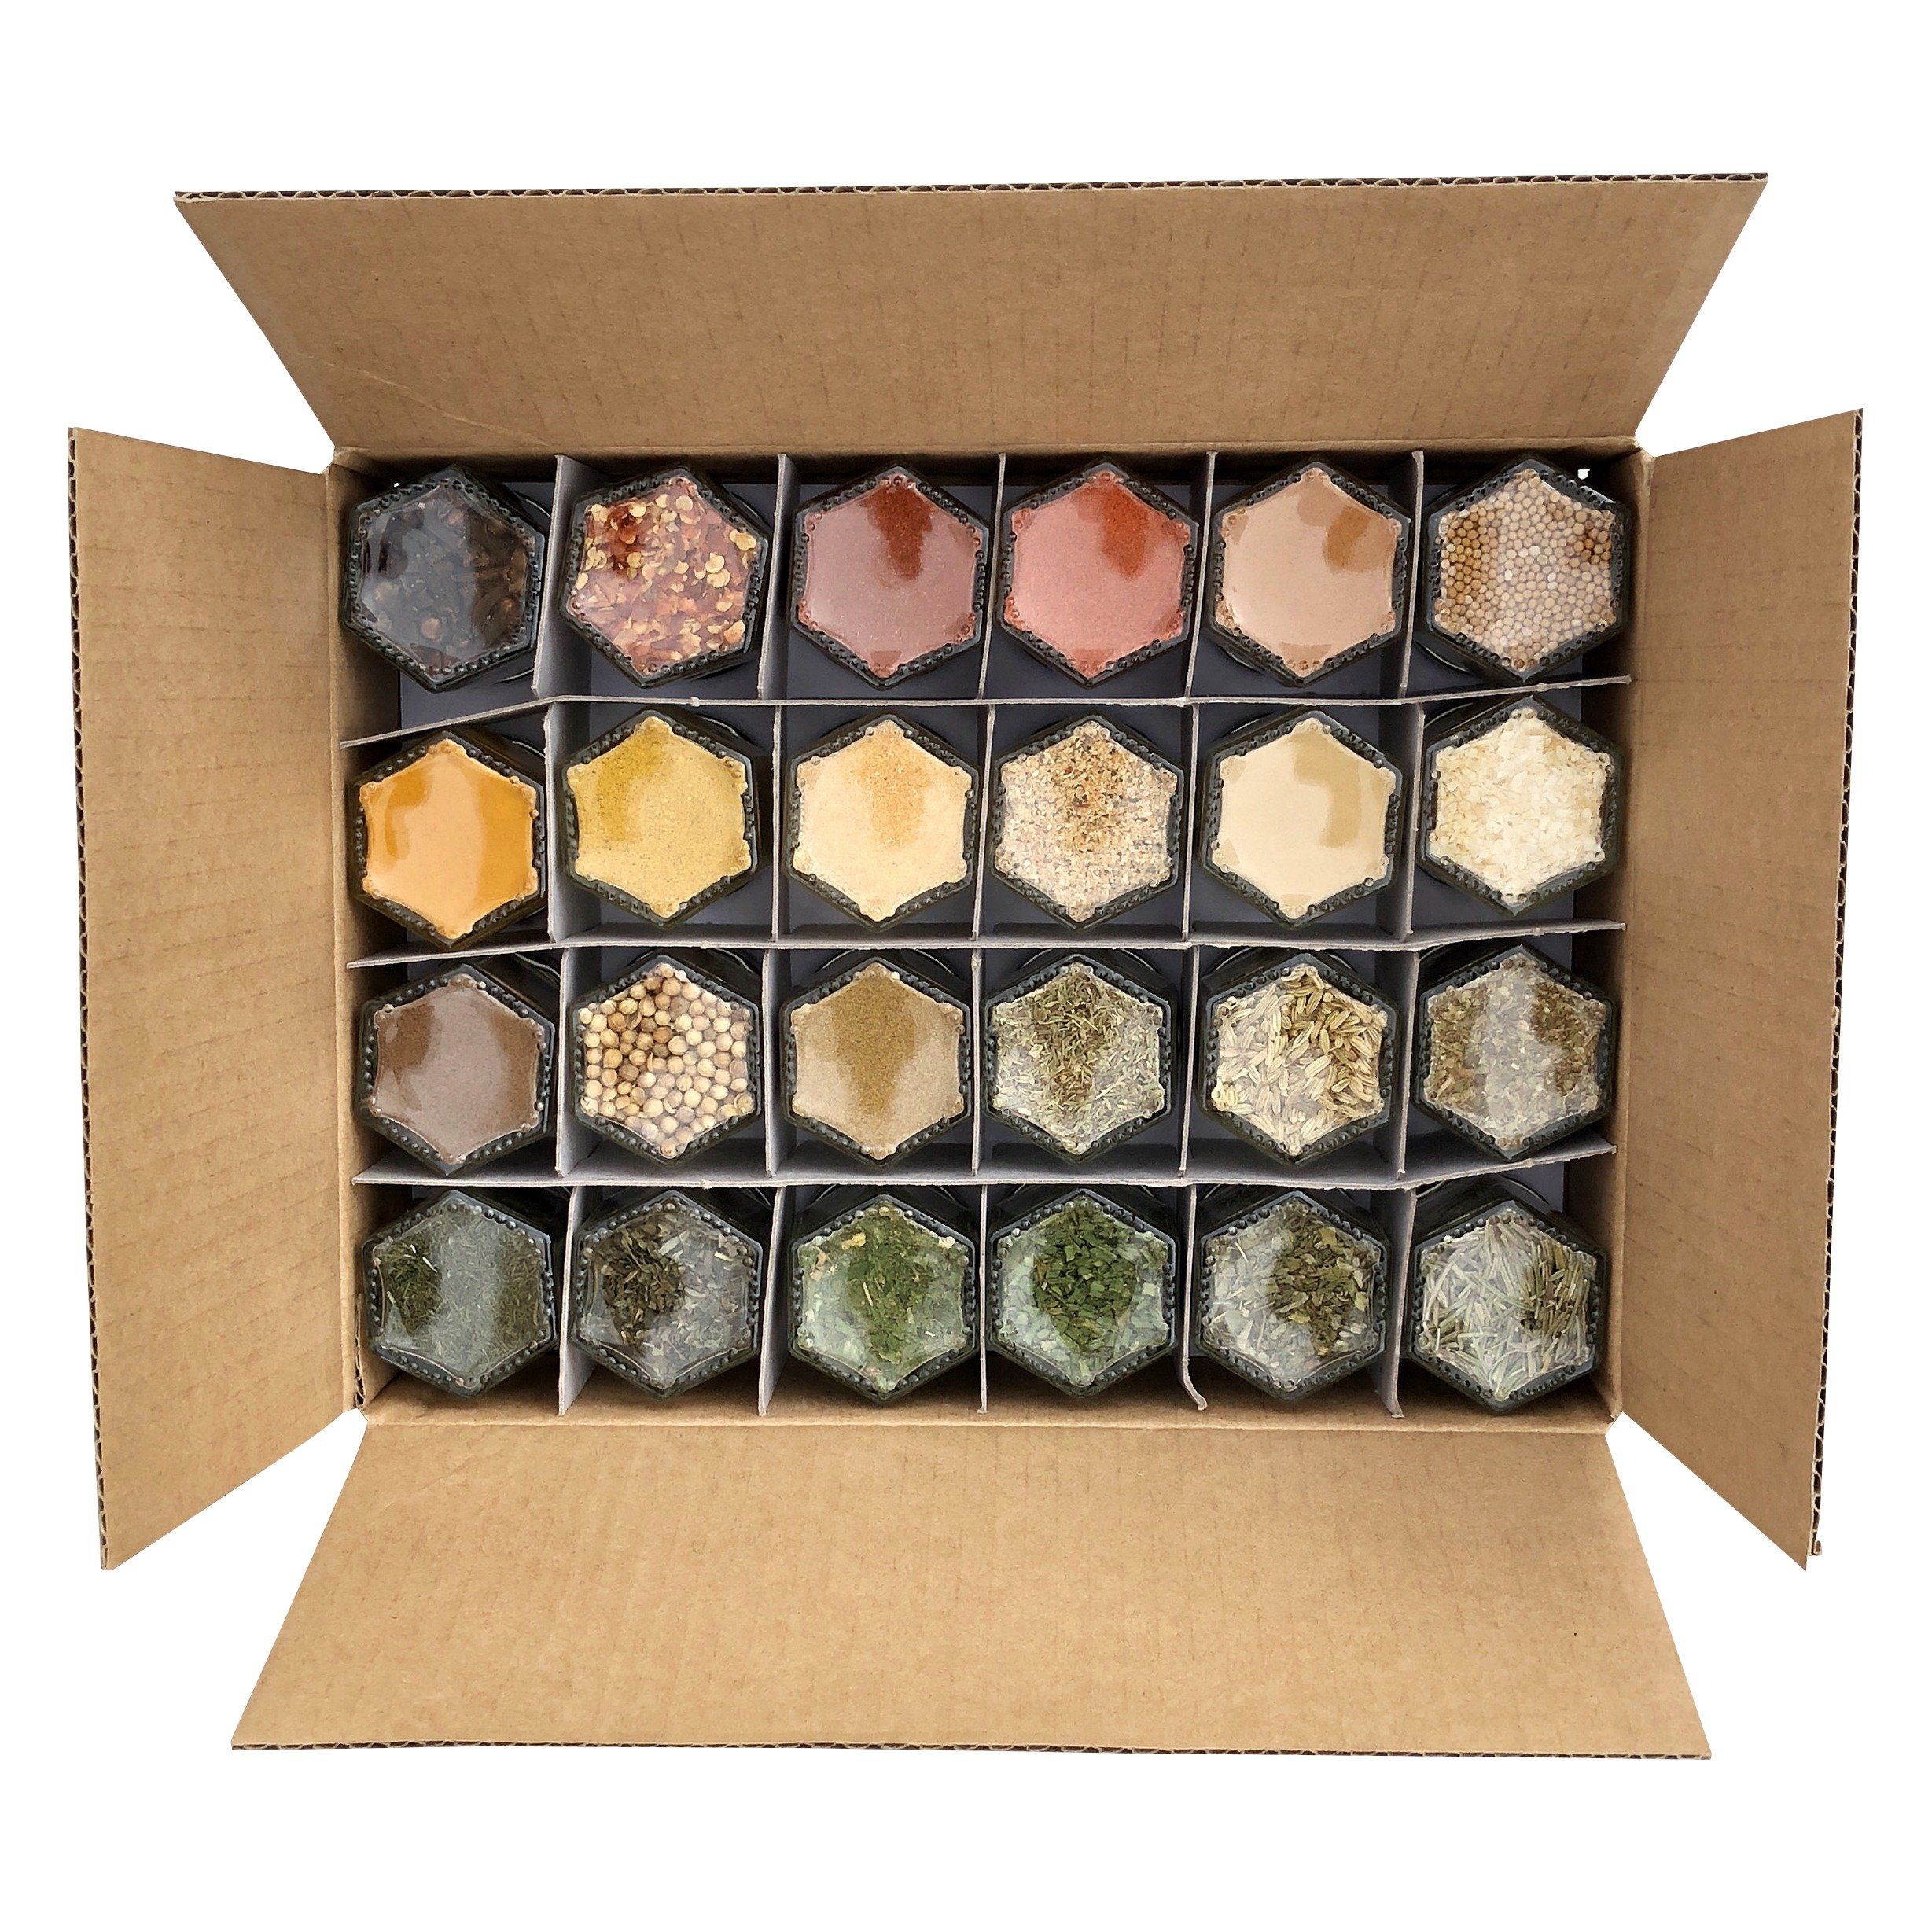 Simply Organic Seasoning and Herb Glass Jar Starter Kit - 24 Pack - Gift  Set for Someone Who Loves to Cook - Get Your Spice Rack Stocked With These